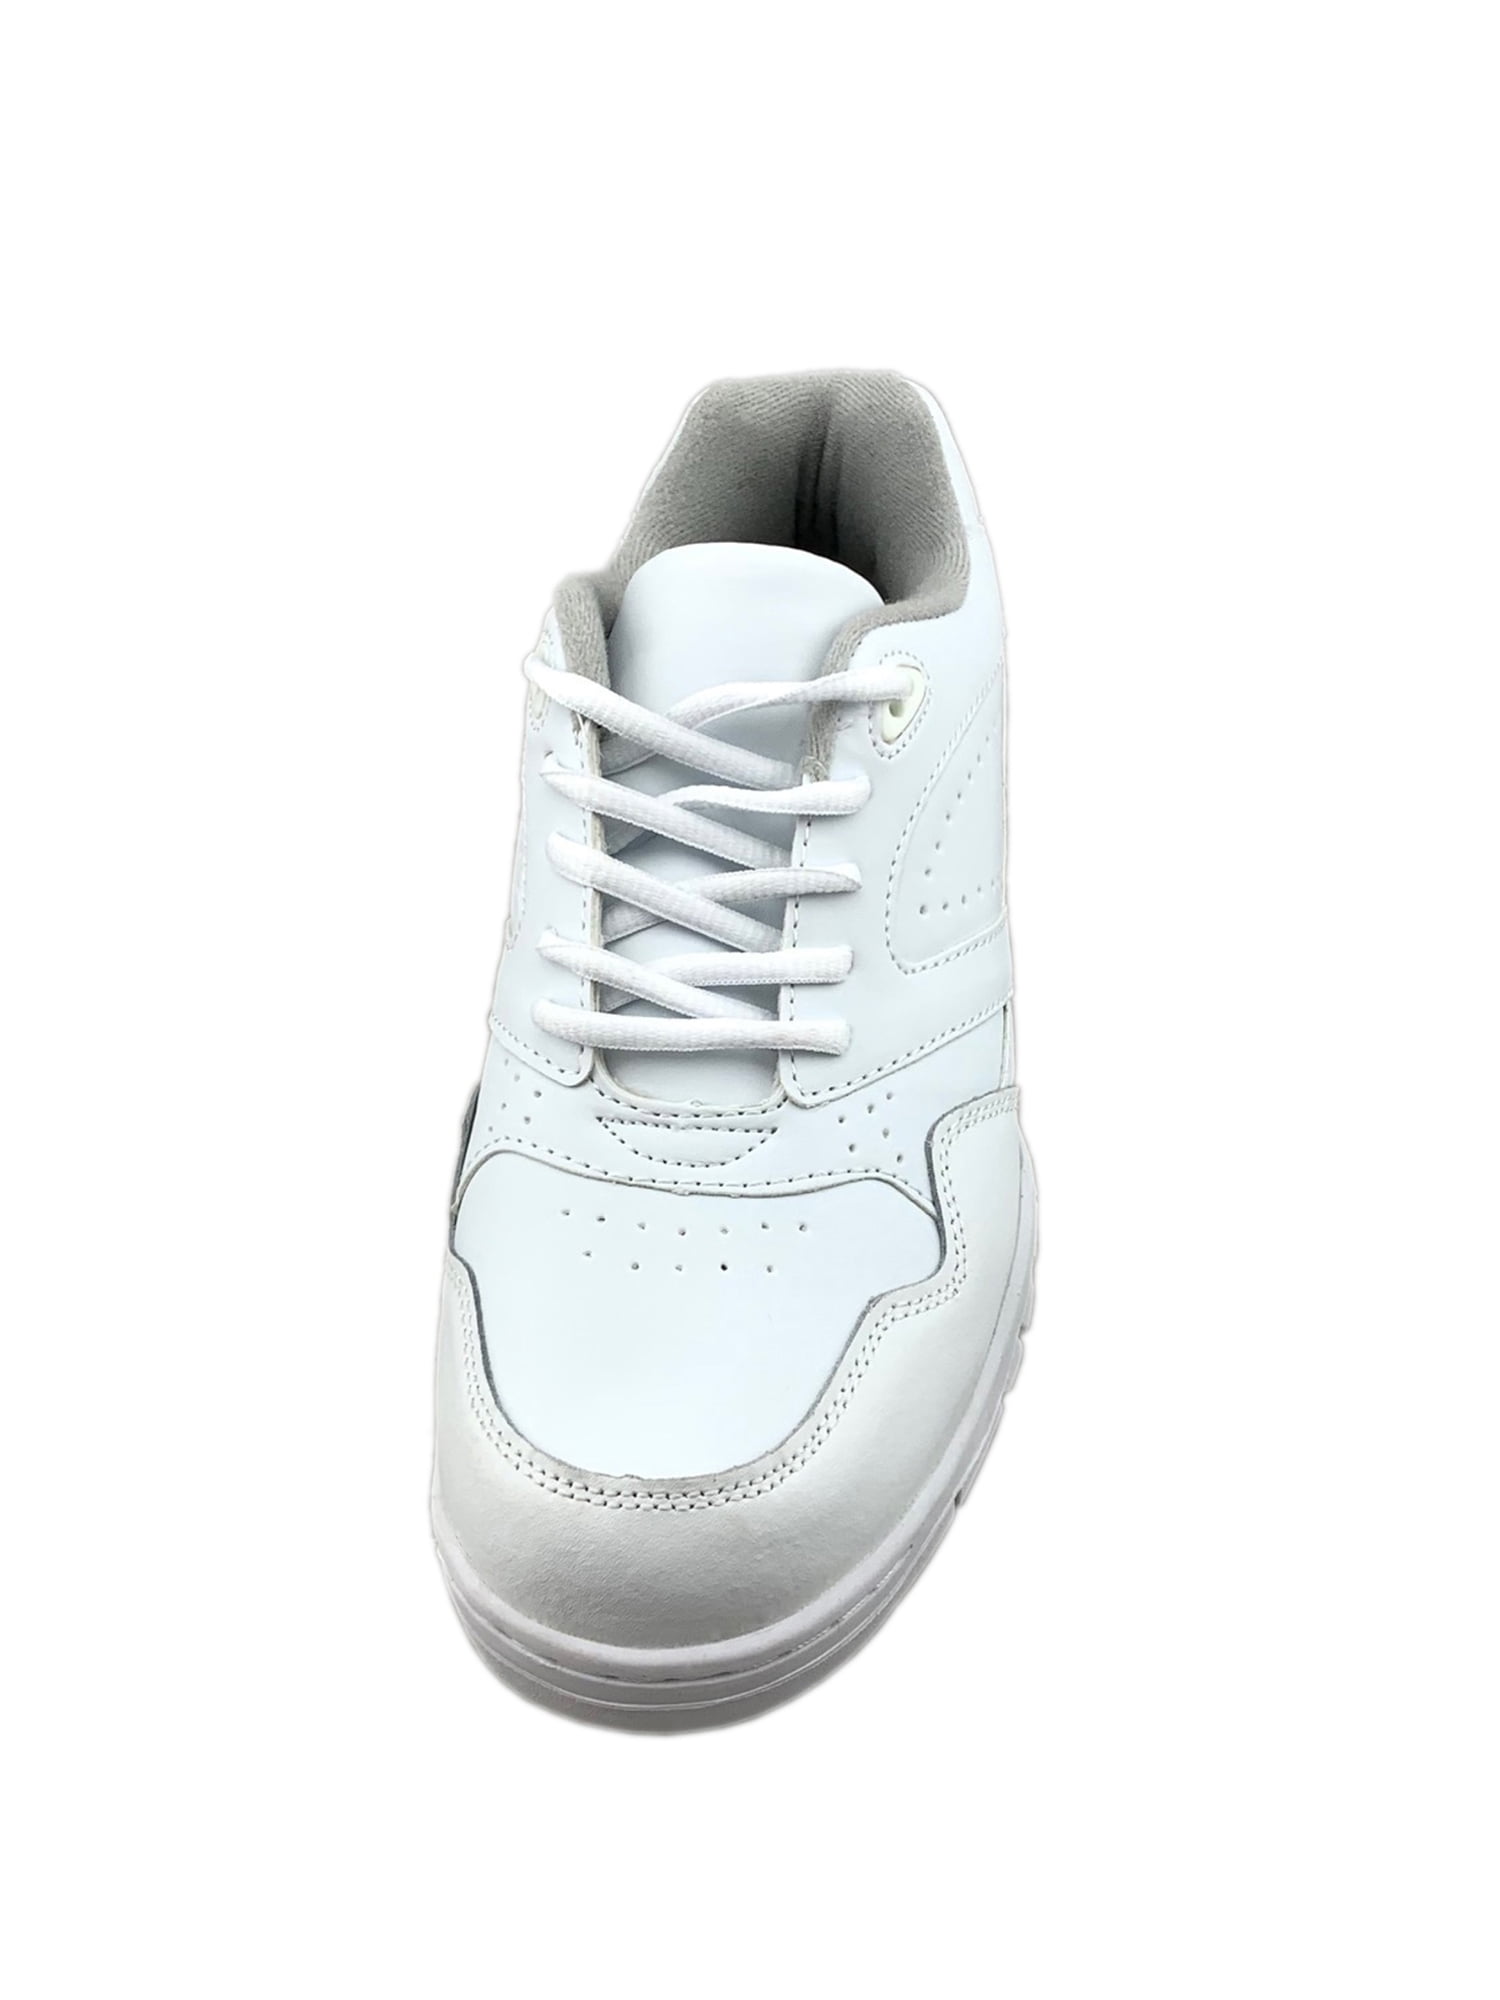 Mens White Leather Sneakers Small Size 